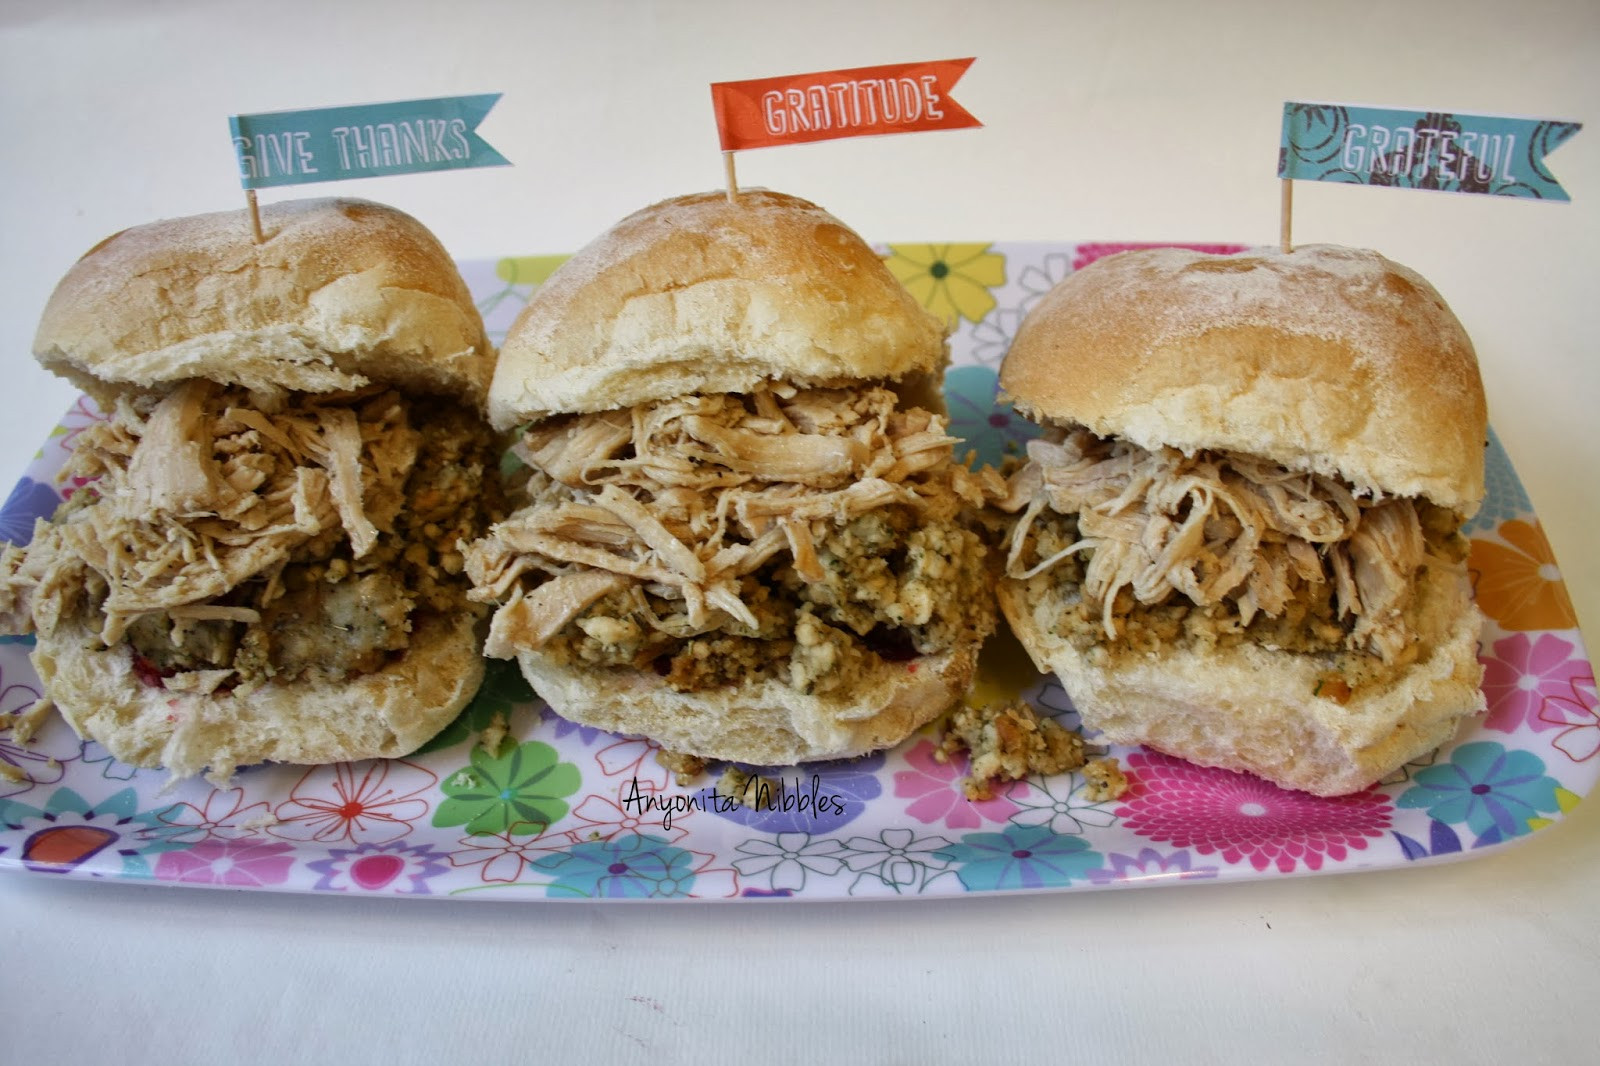 Pulled Turkey Sandwiches
 Anyonita Nibbles